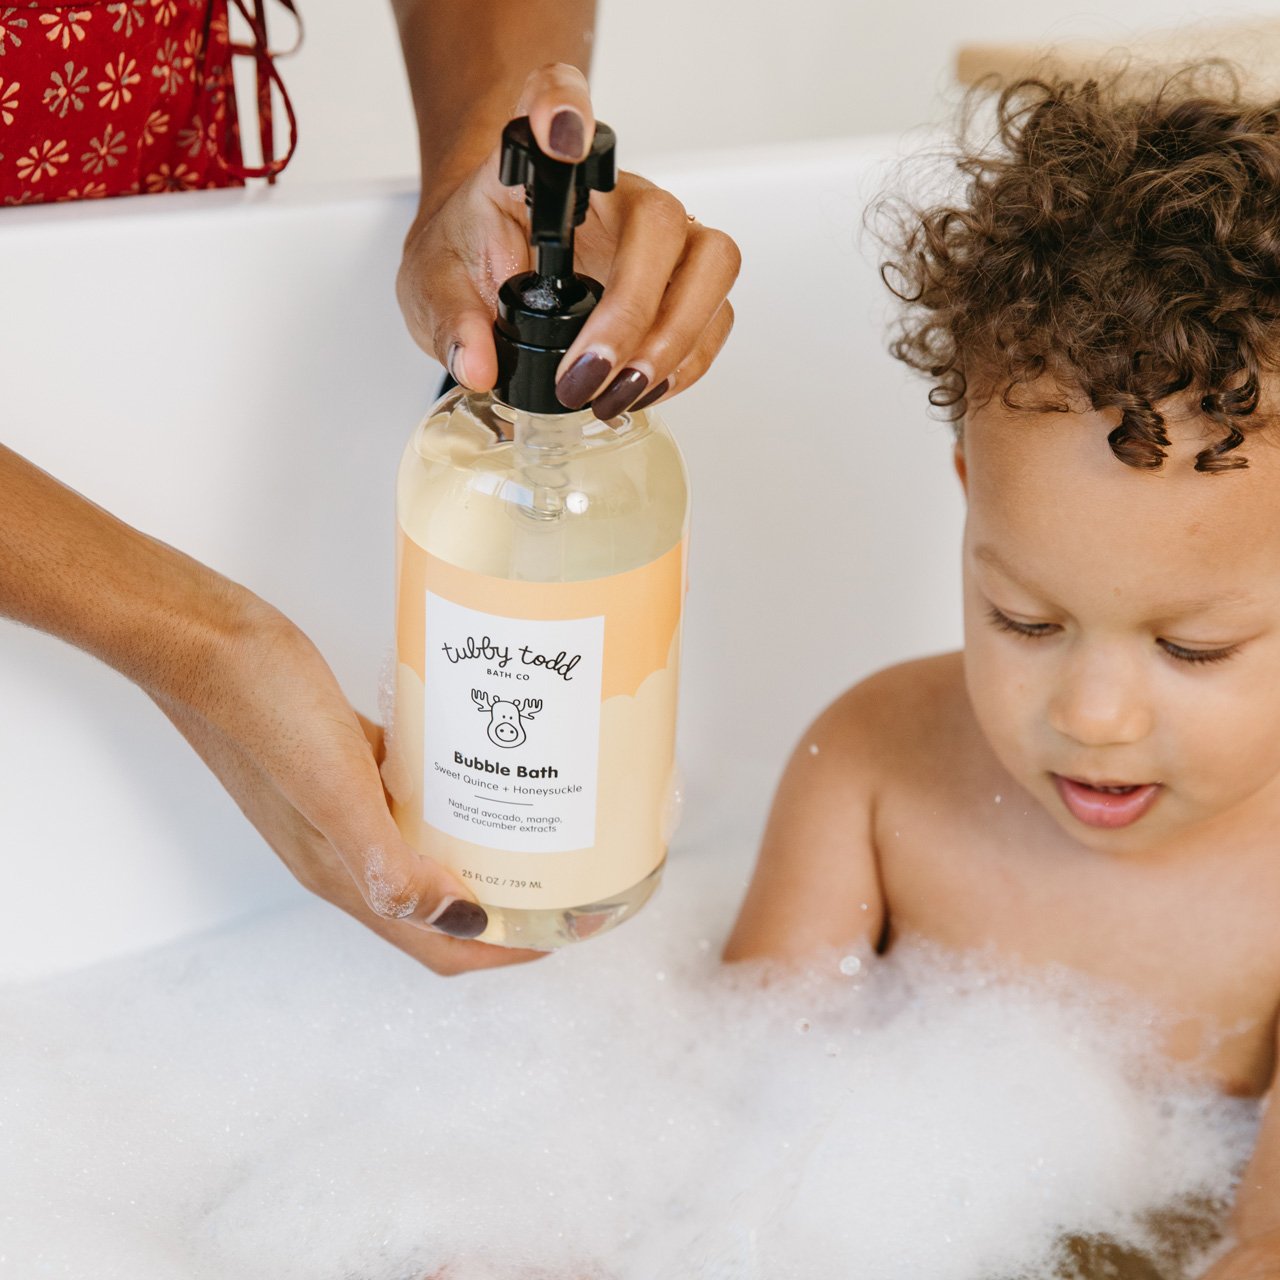 Mom putting Bubble Bath into tub with toddler boy